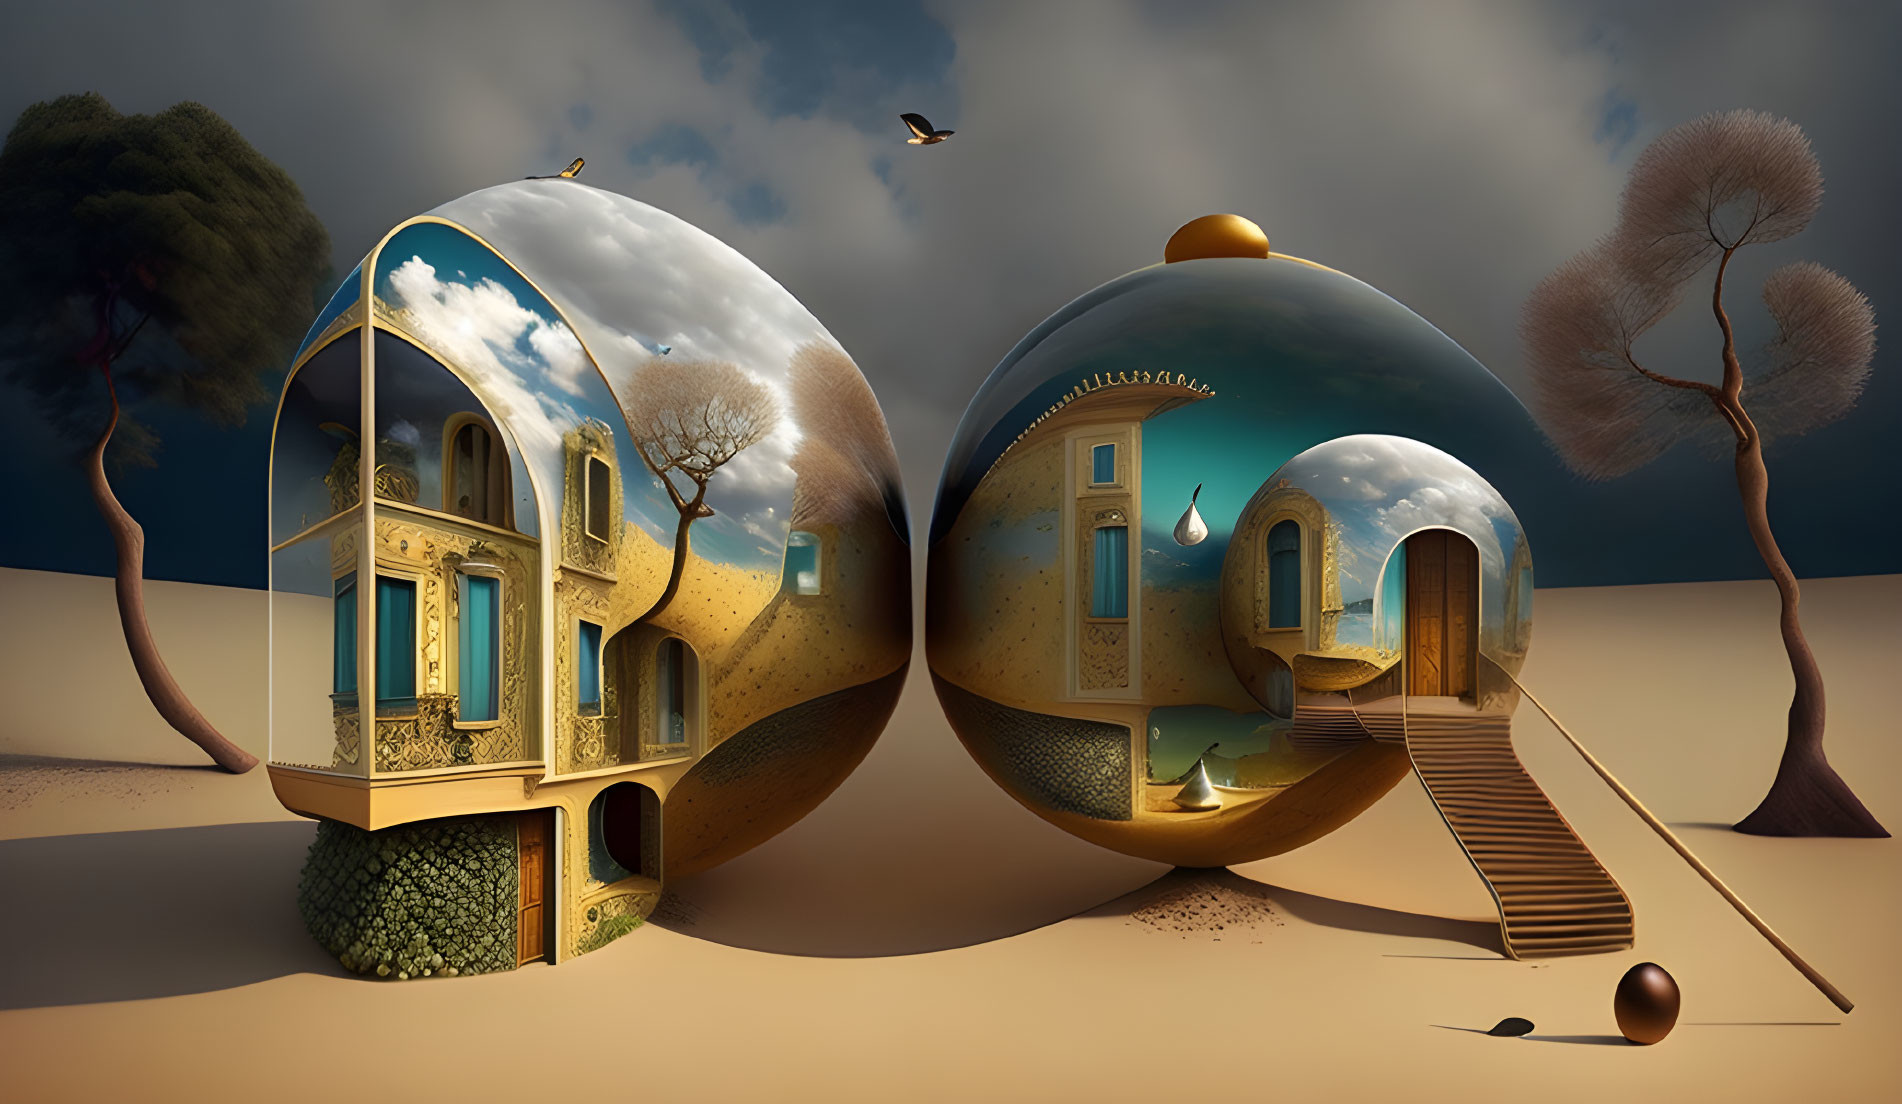 Surreal landscape with oversized reflective spheres merging architecture and nature